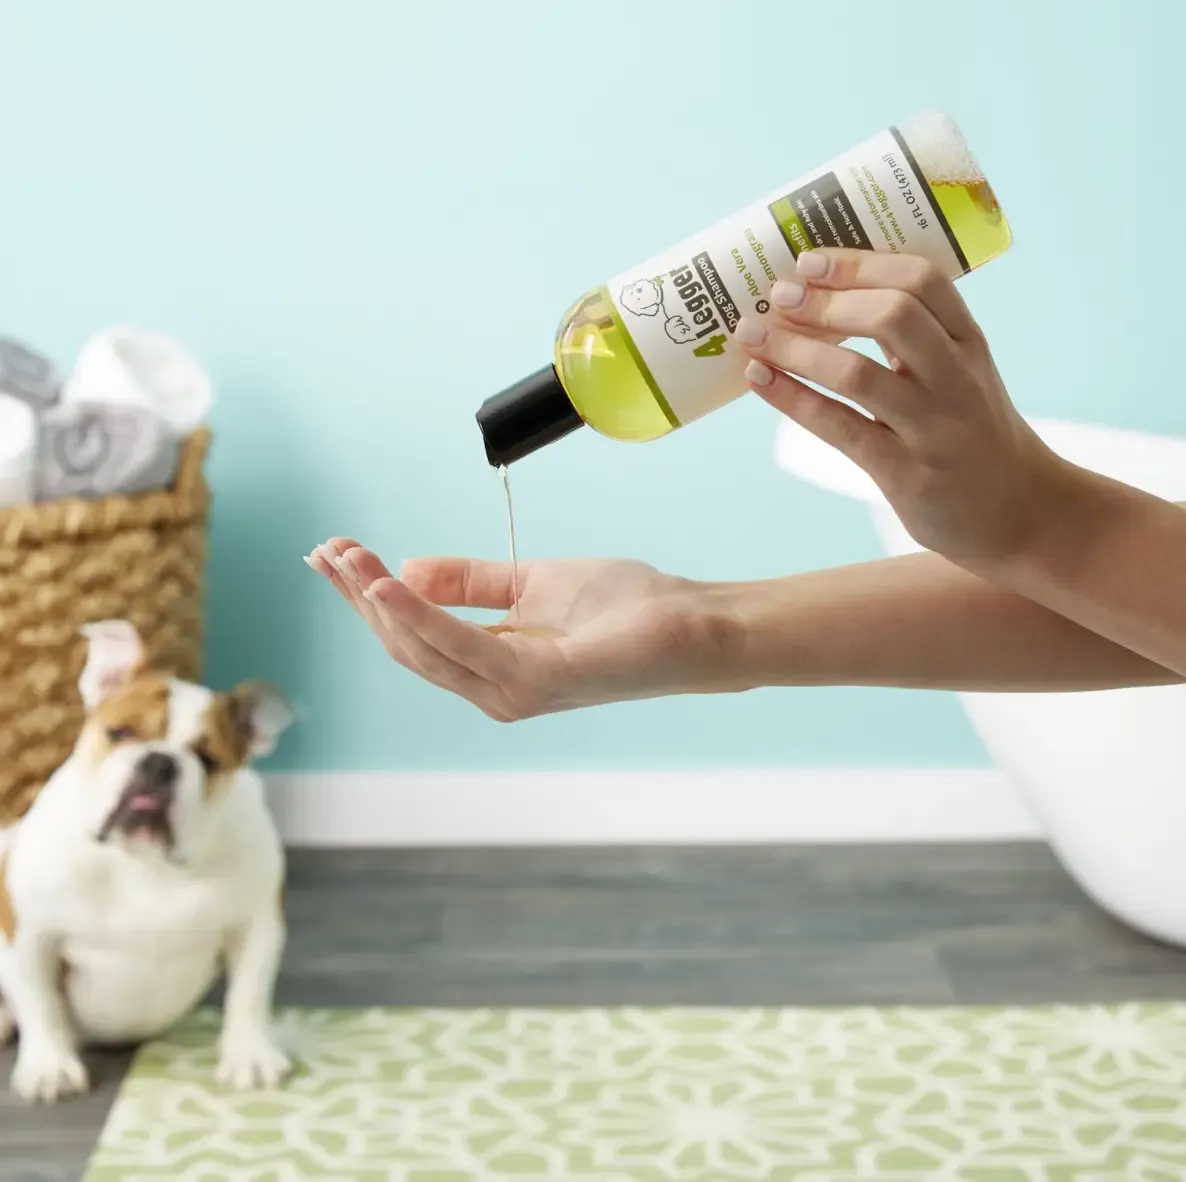 Use Non-Toxic Pet Shampoos & Cleaning Supplies